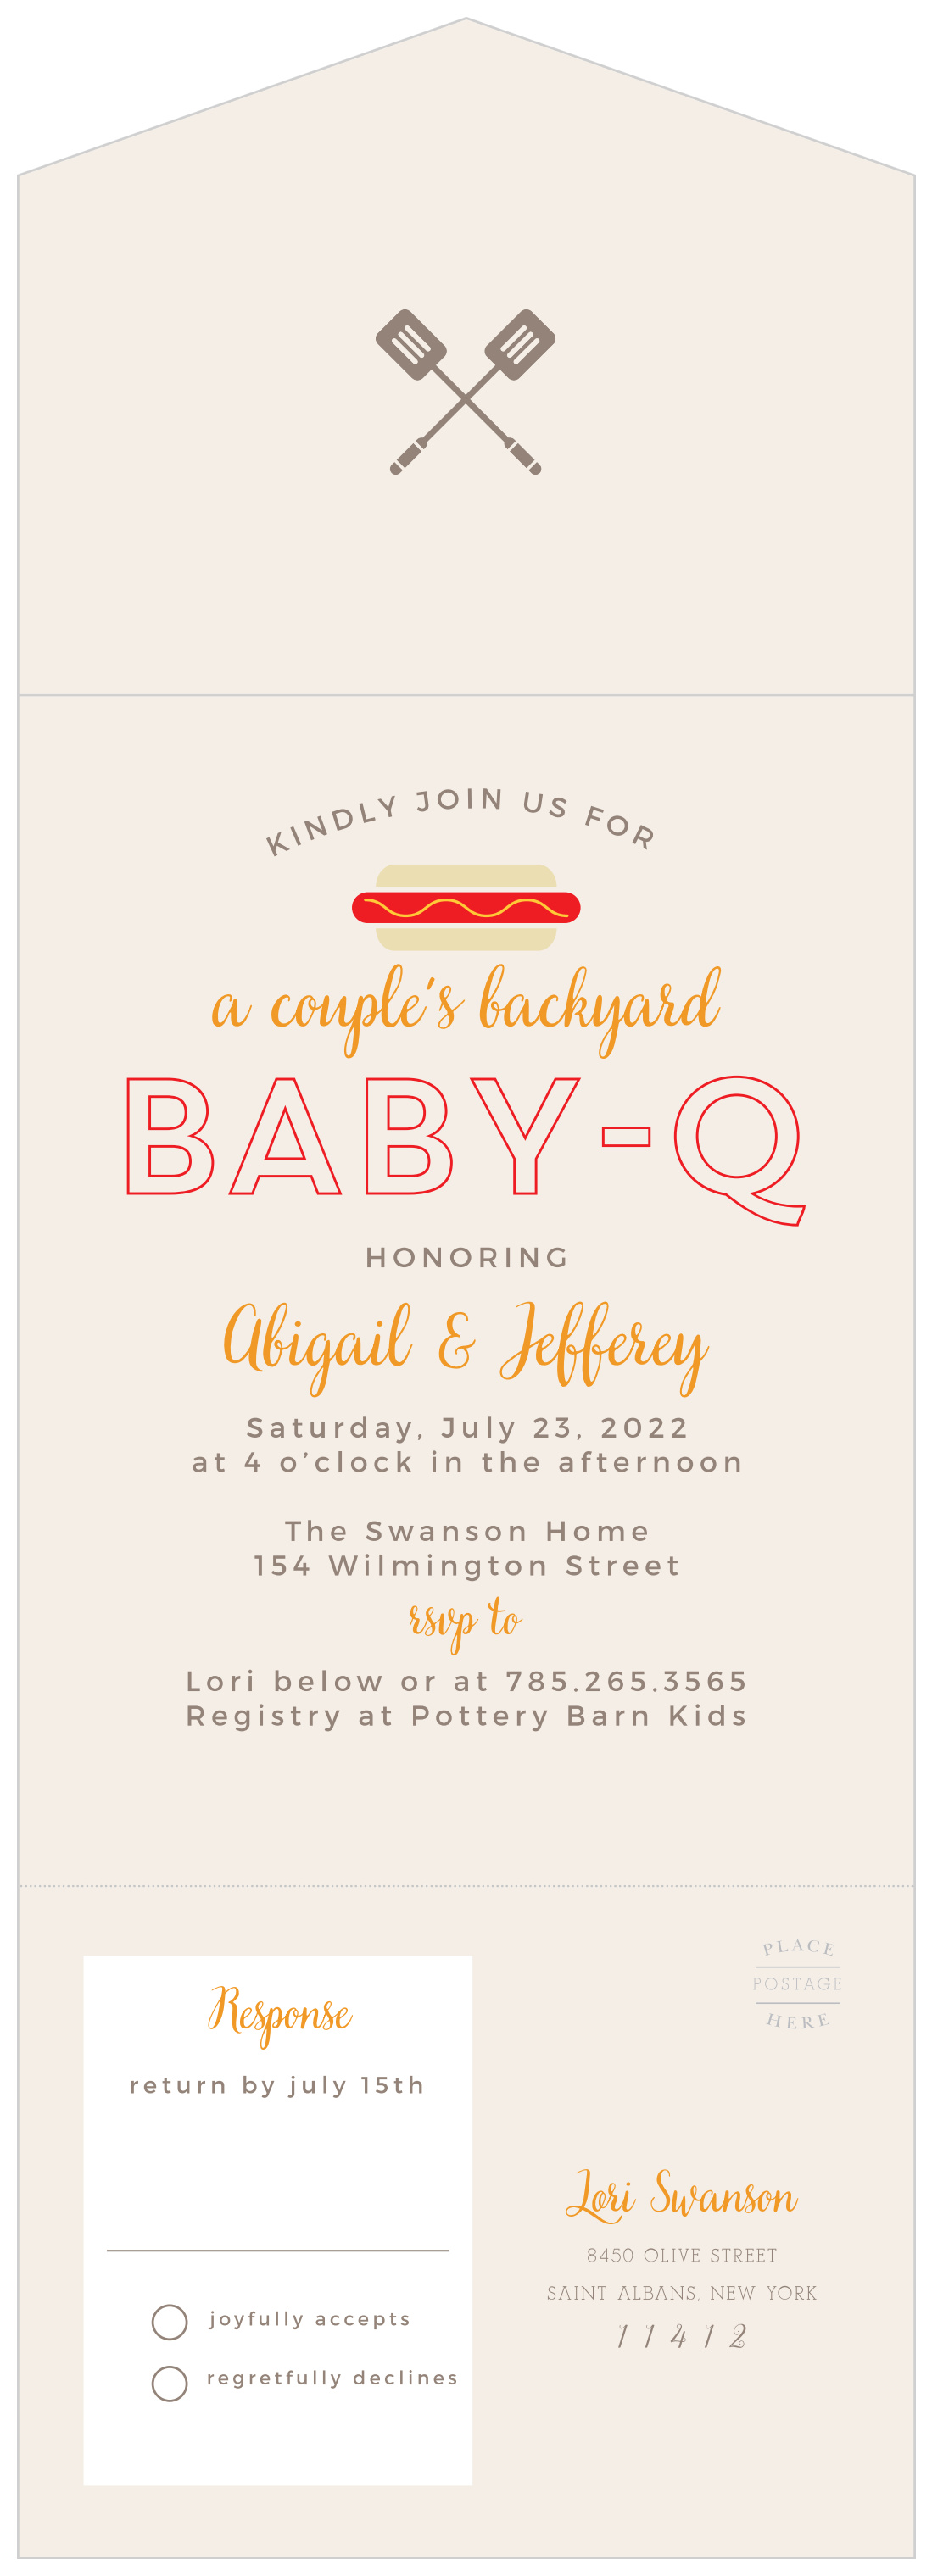 Baby-Q Seal & Send Baby Shower Invitations